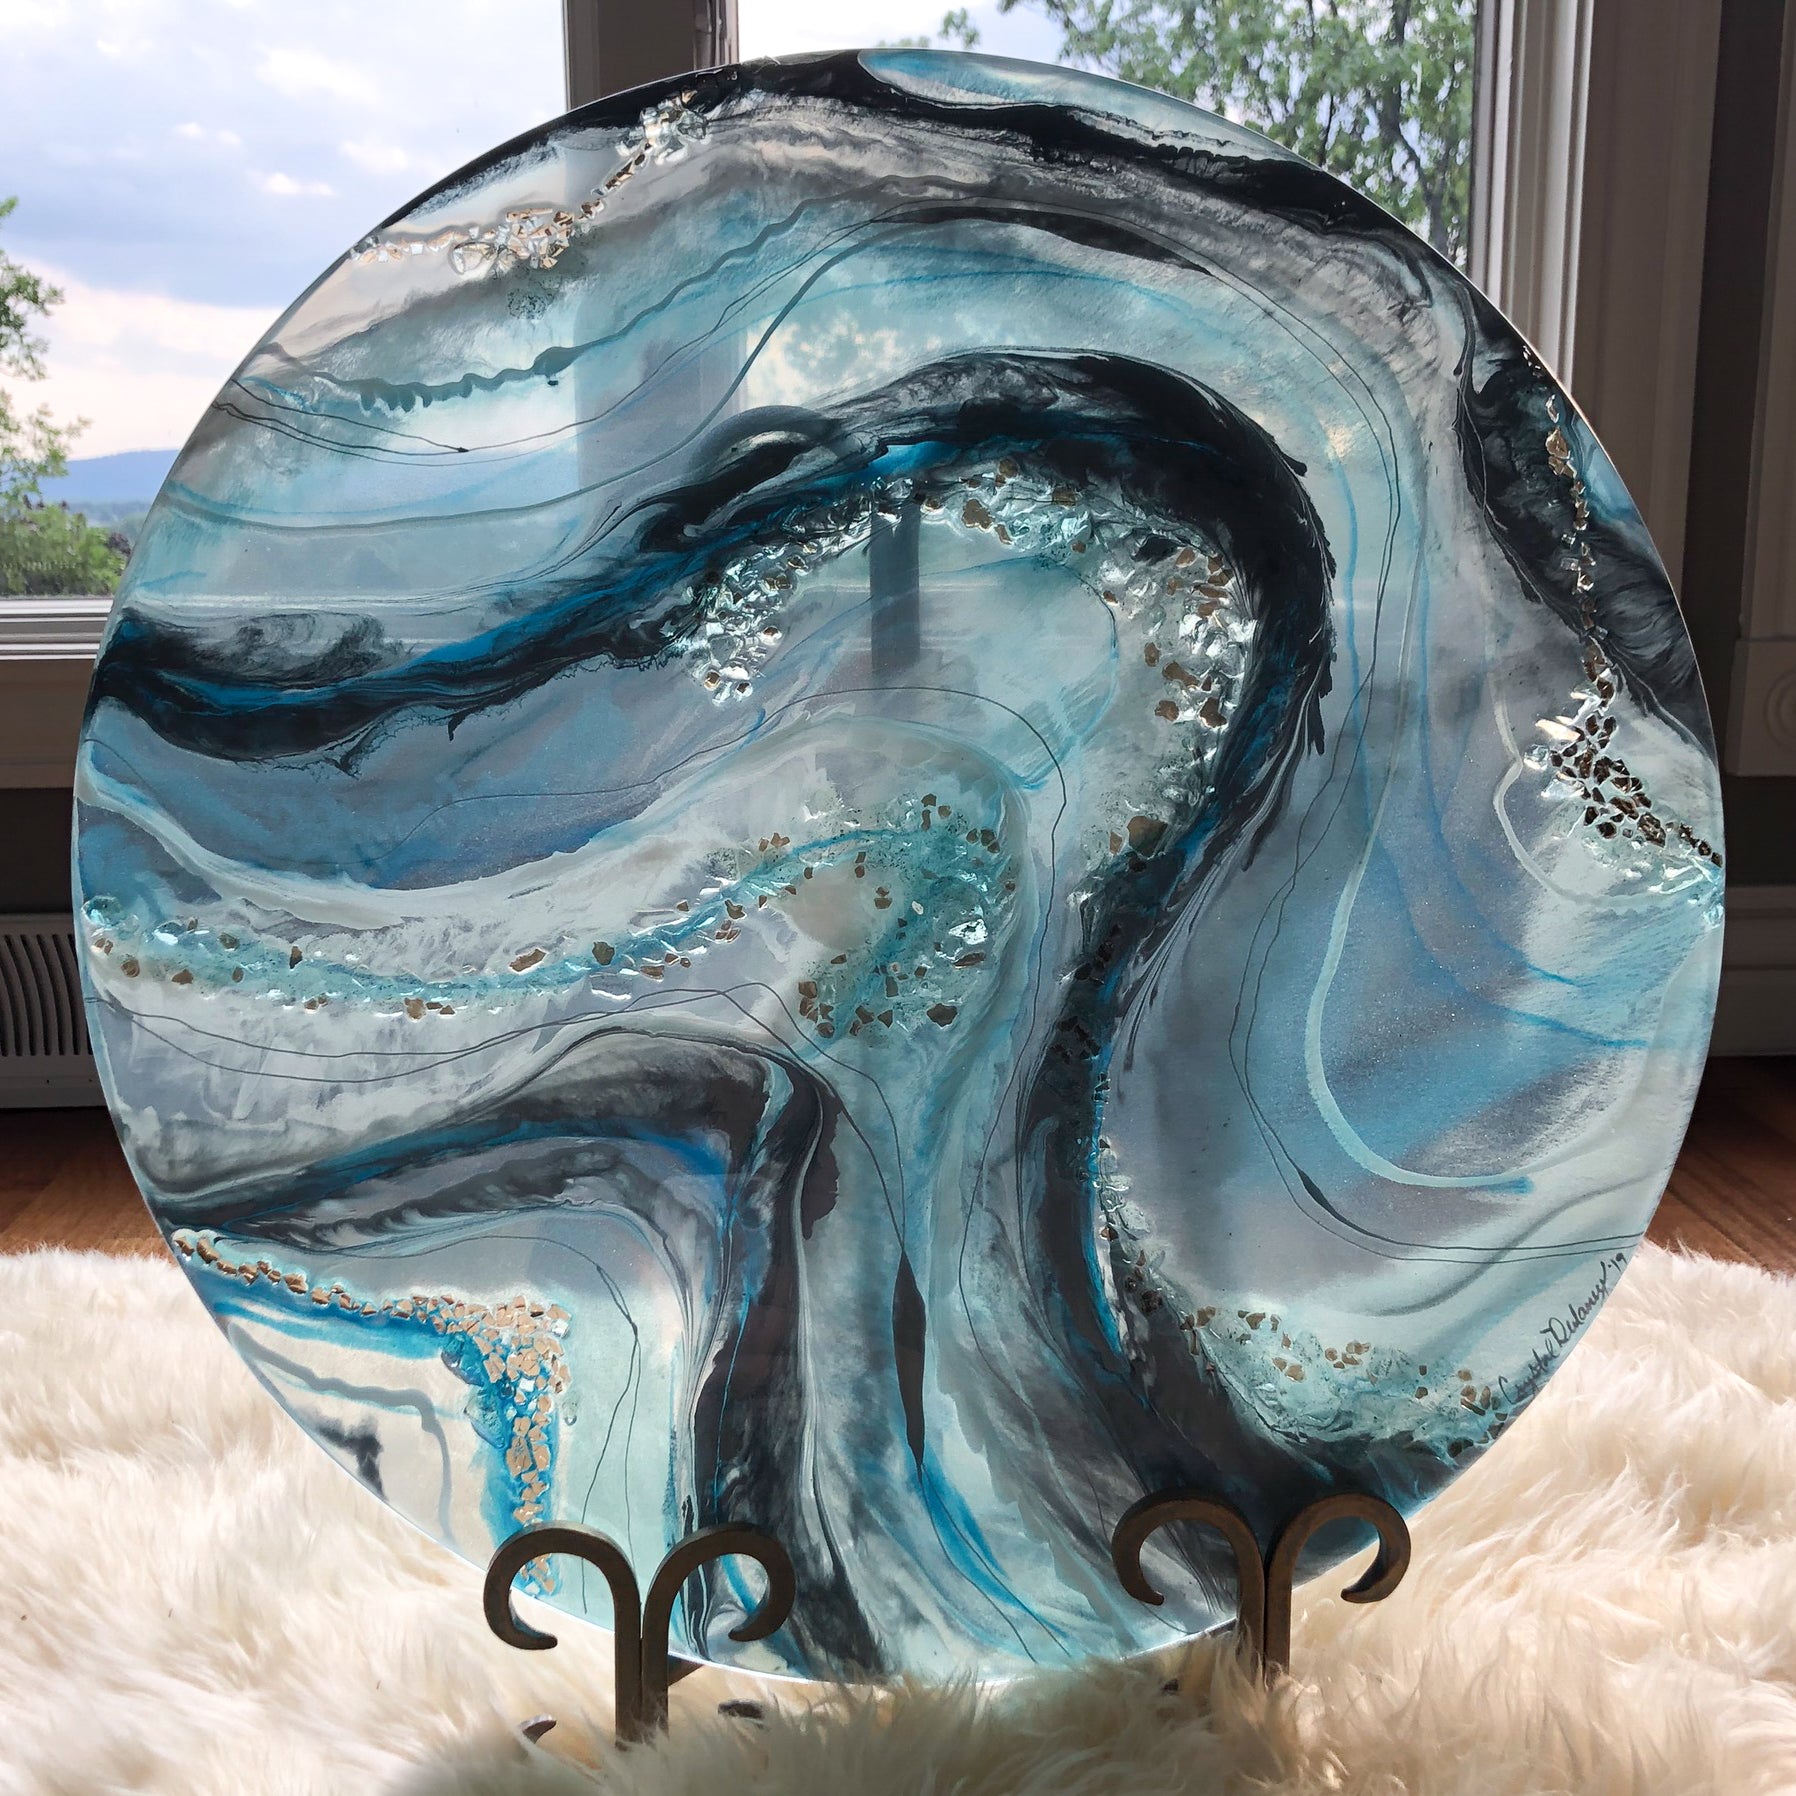 resin painting on glass (stand included)